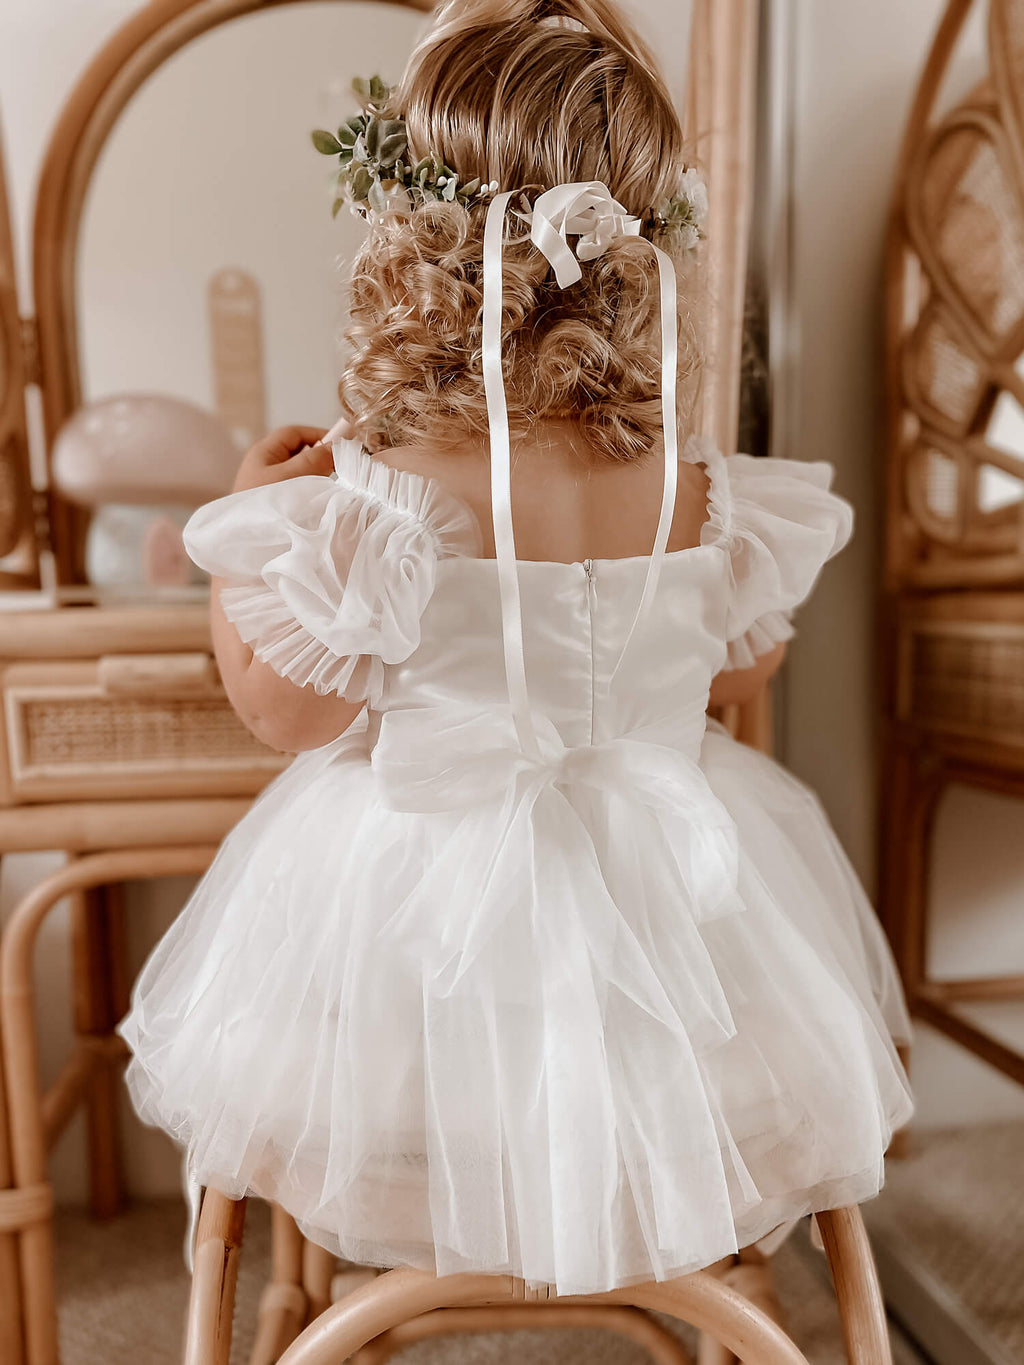 Toddler wears our Layla baby flower girl romper dress in ivory.